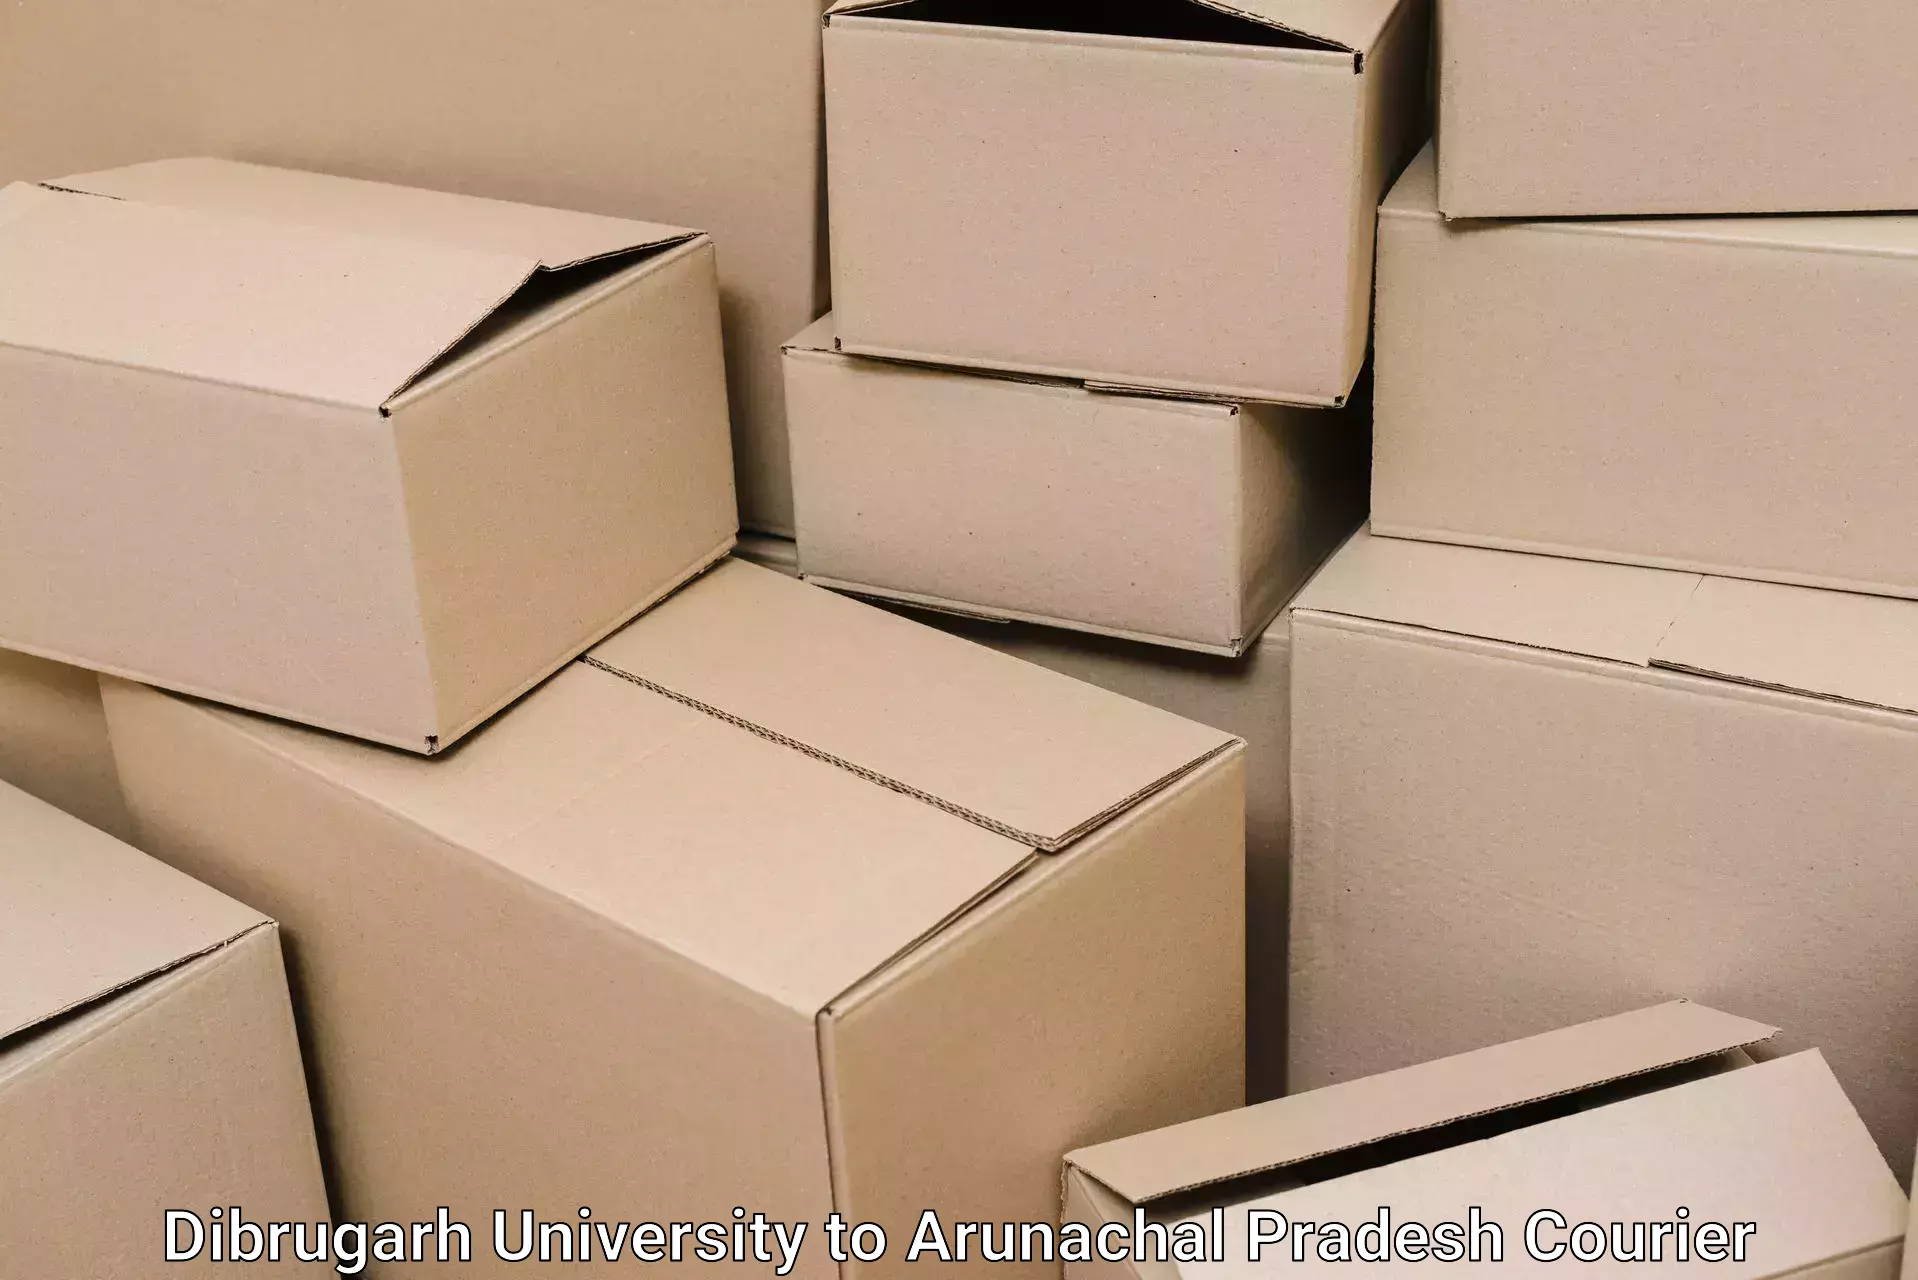 Furniture shipping services Dibrugarh University to Lohit